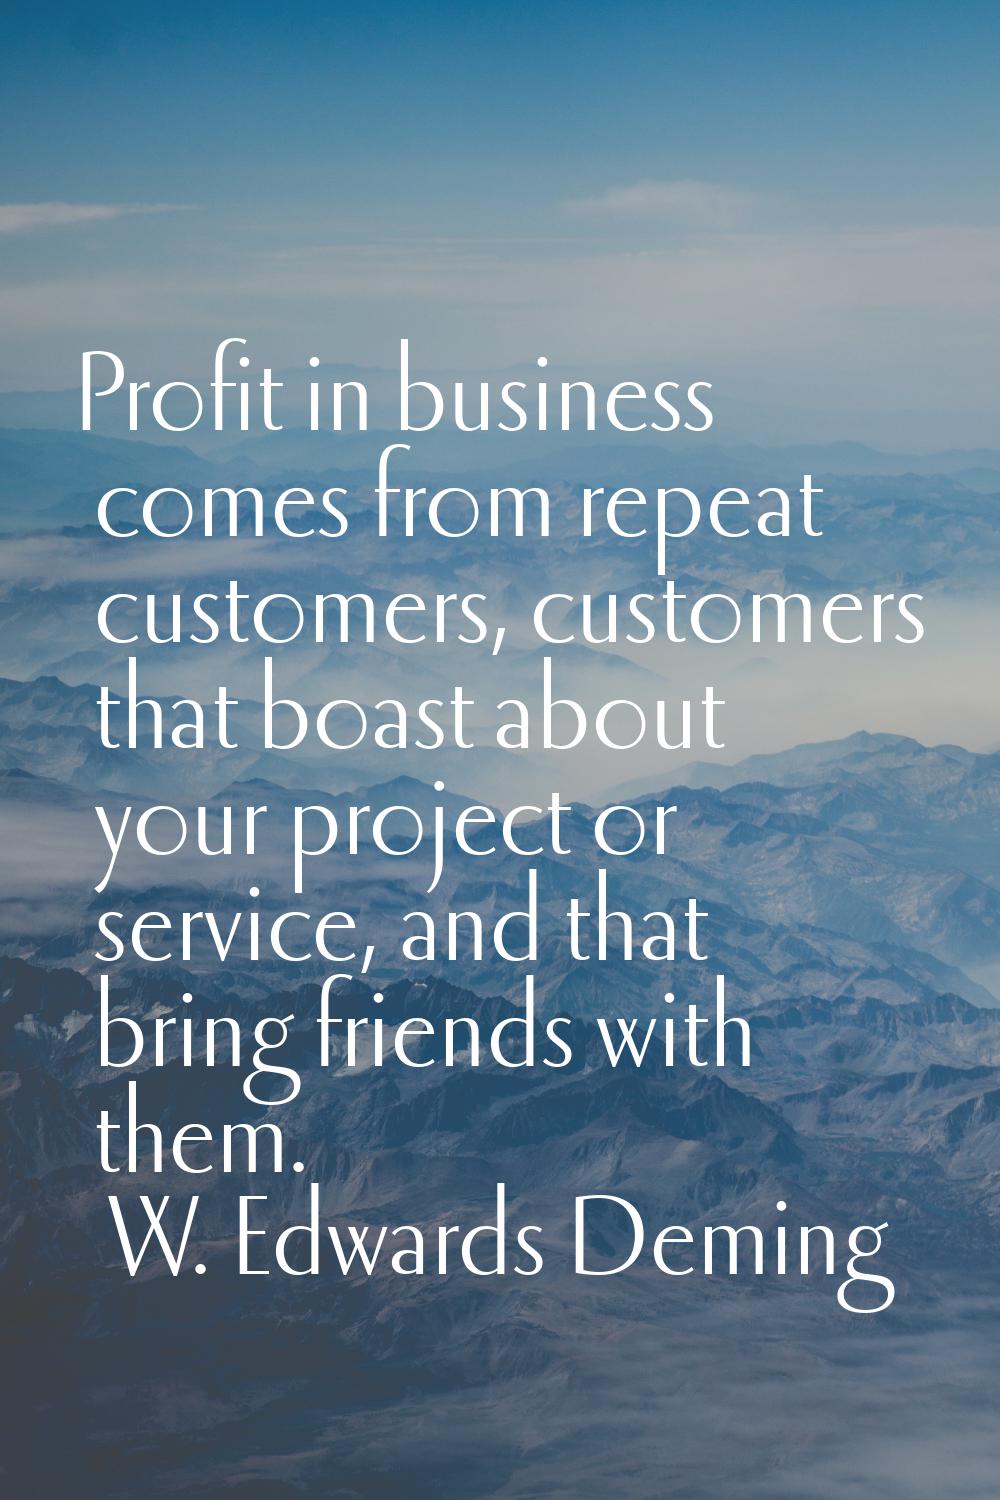 Profit in business comes from repeat customers, customers that boast about your project or service,